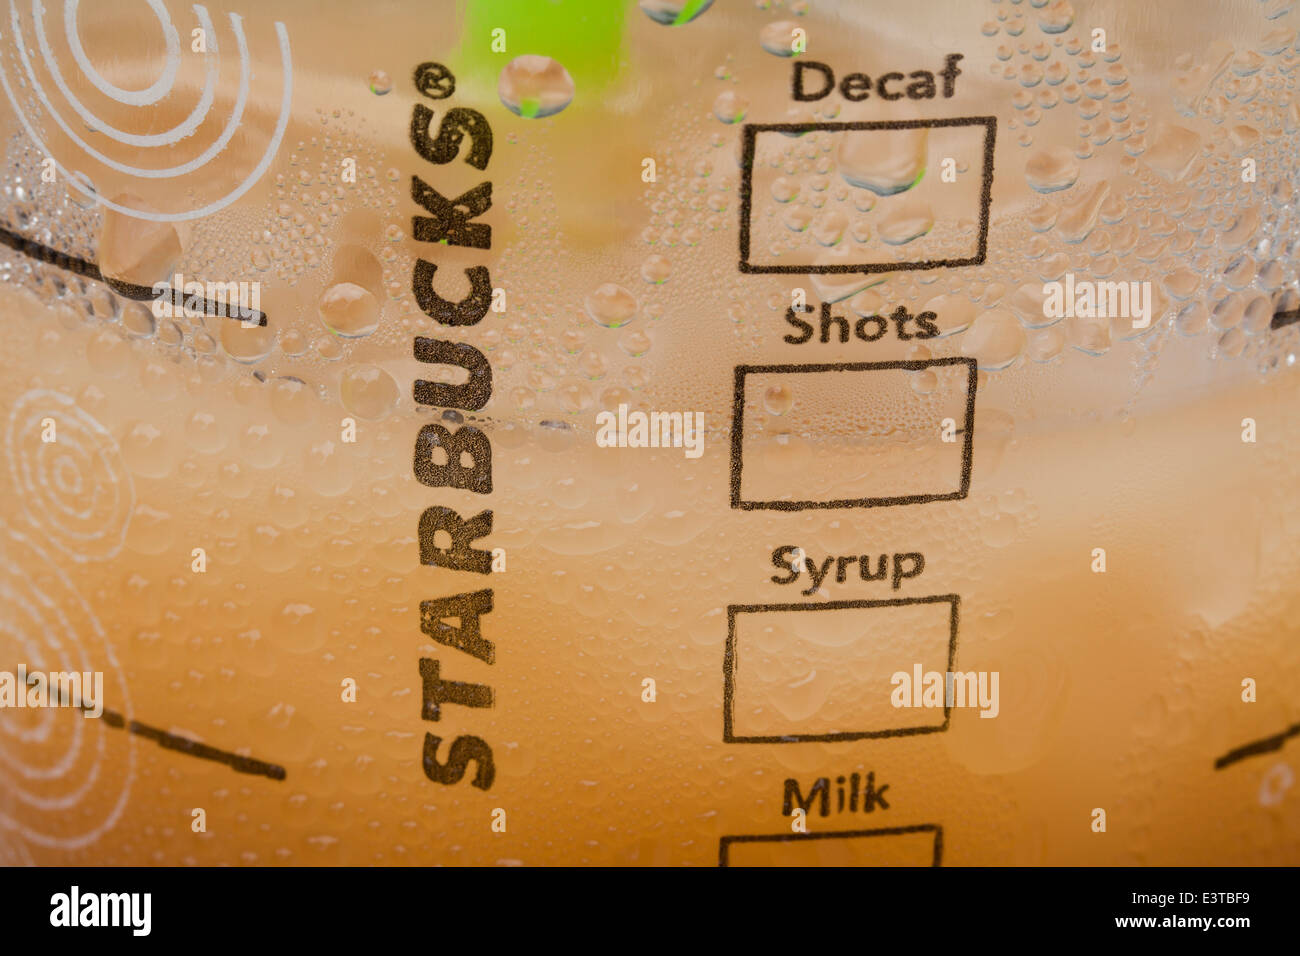 Condensation on Starbucks iced coffee cup Stock Photo